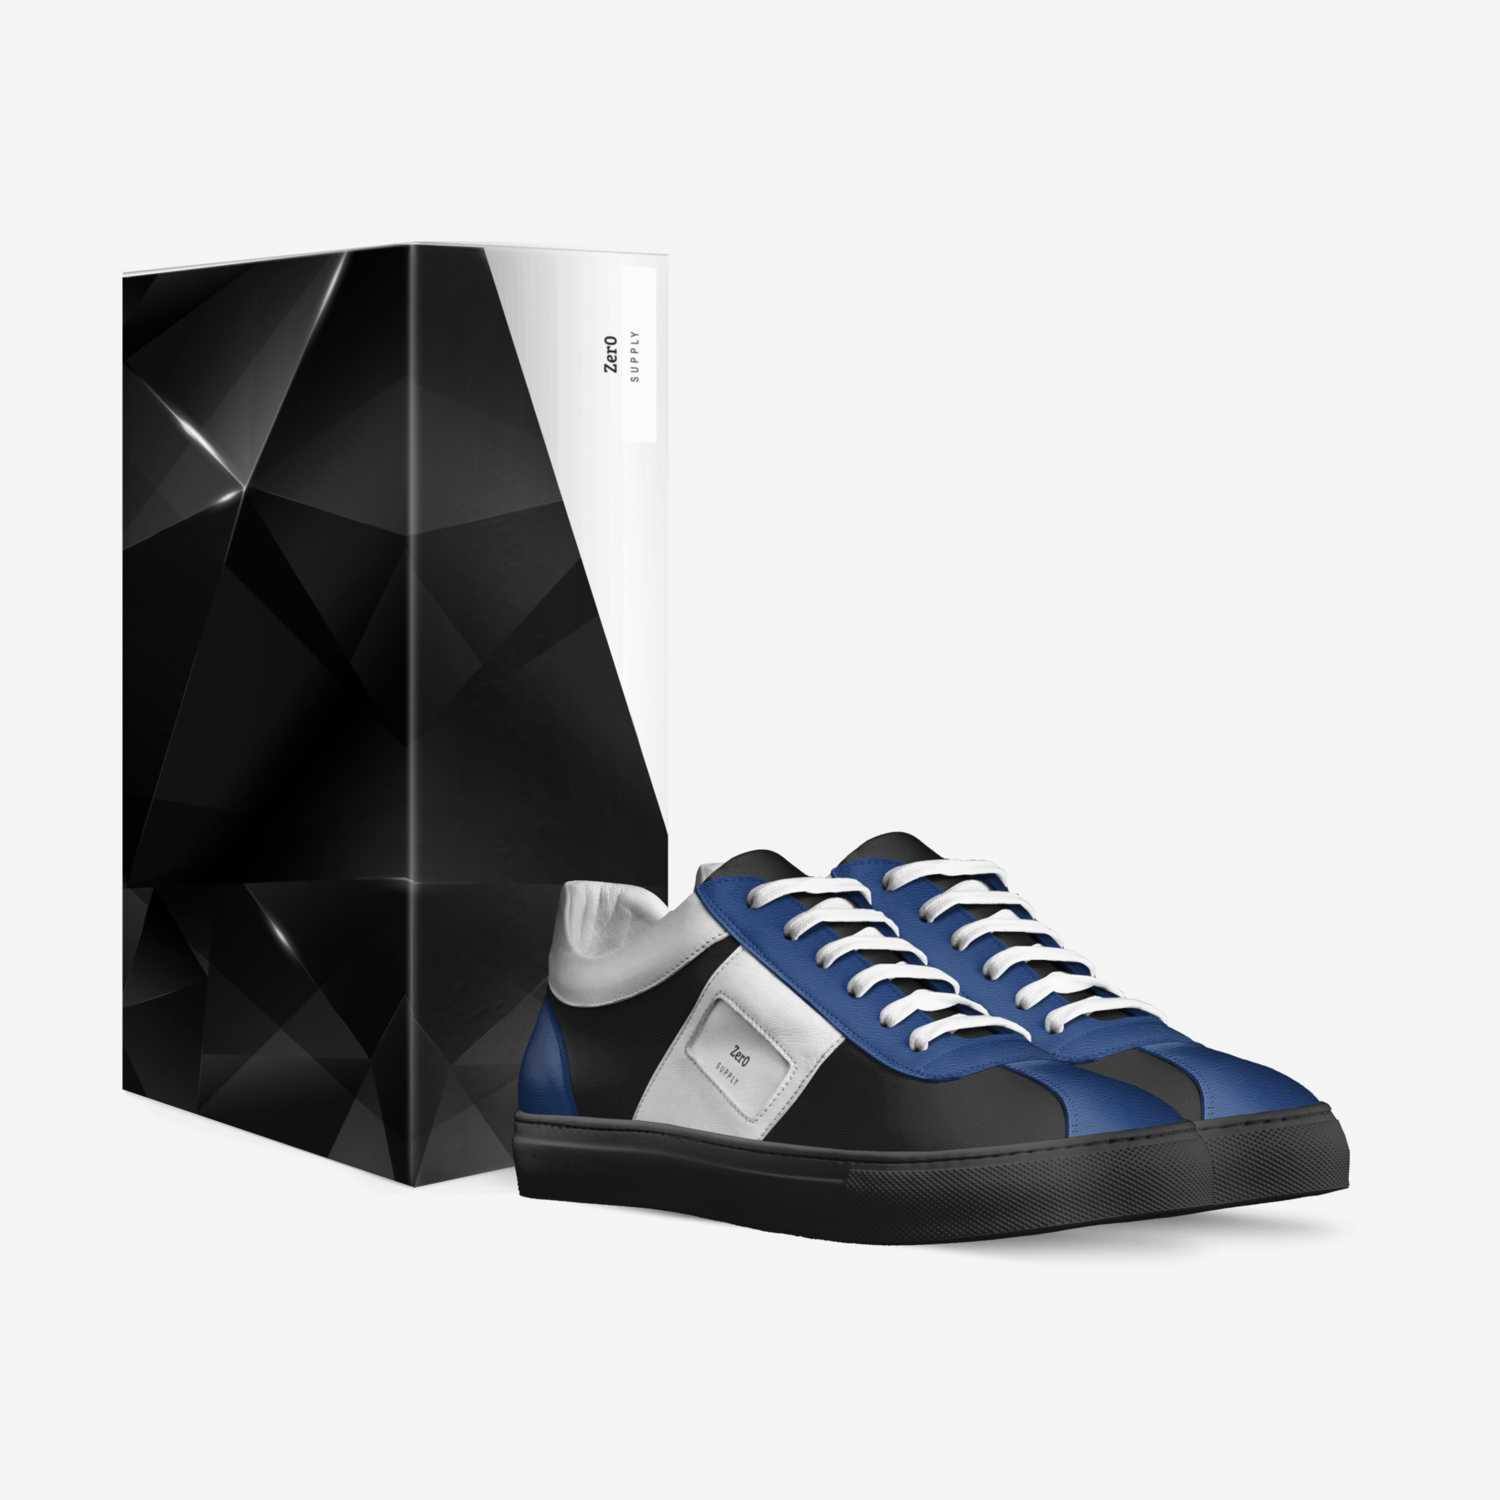 Approaching zer0 custom made in Italy shoes by Shane Dixon | Box view